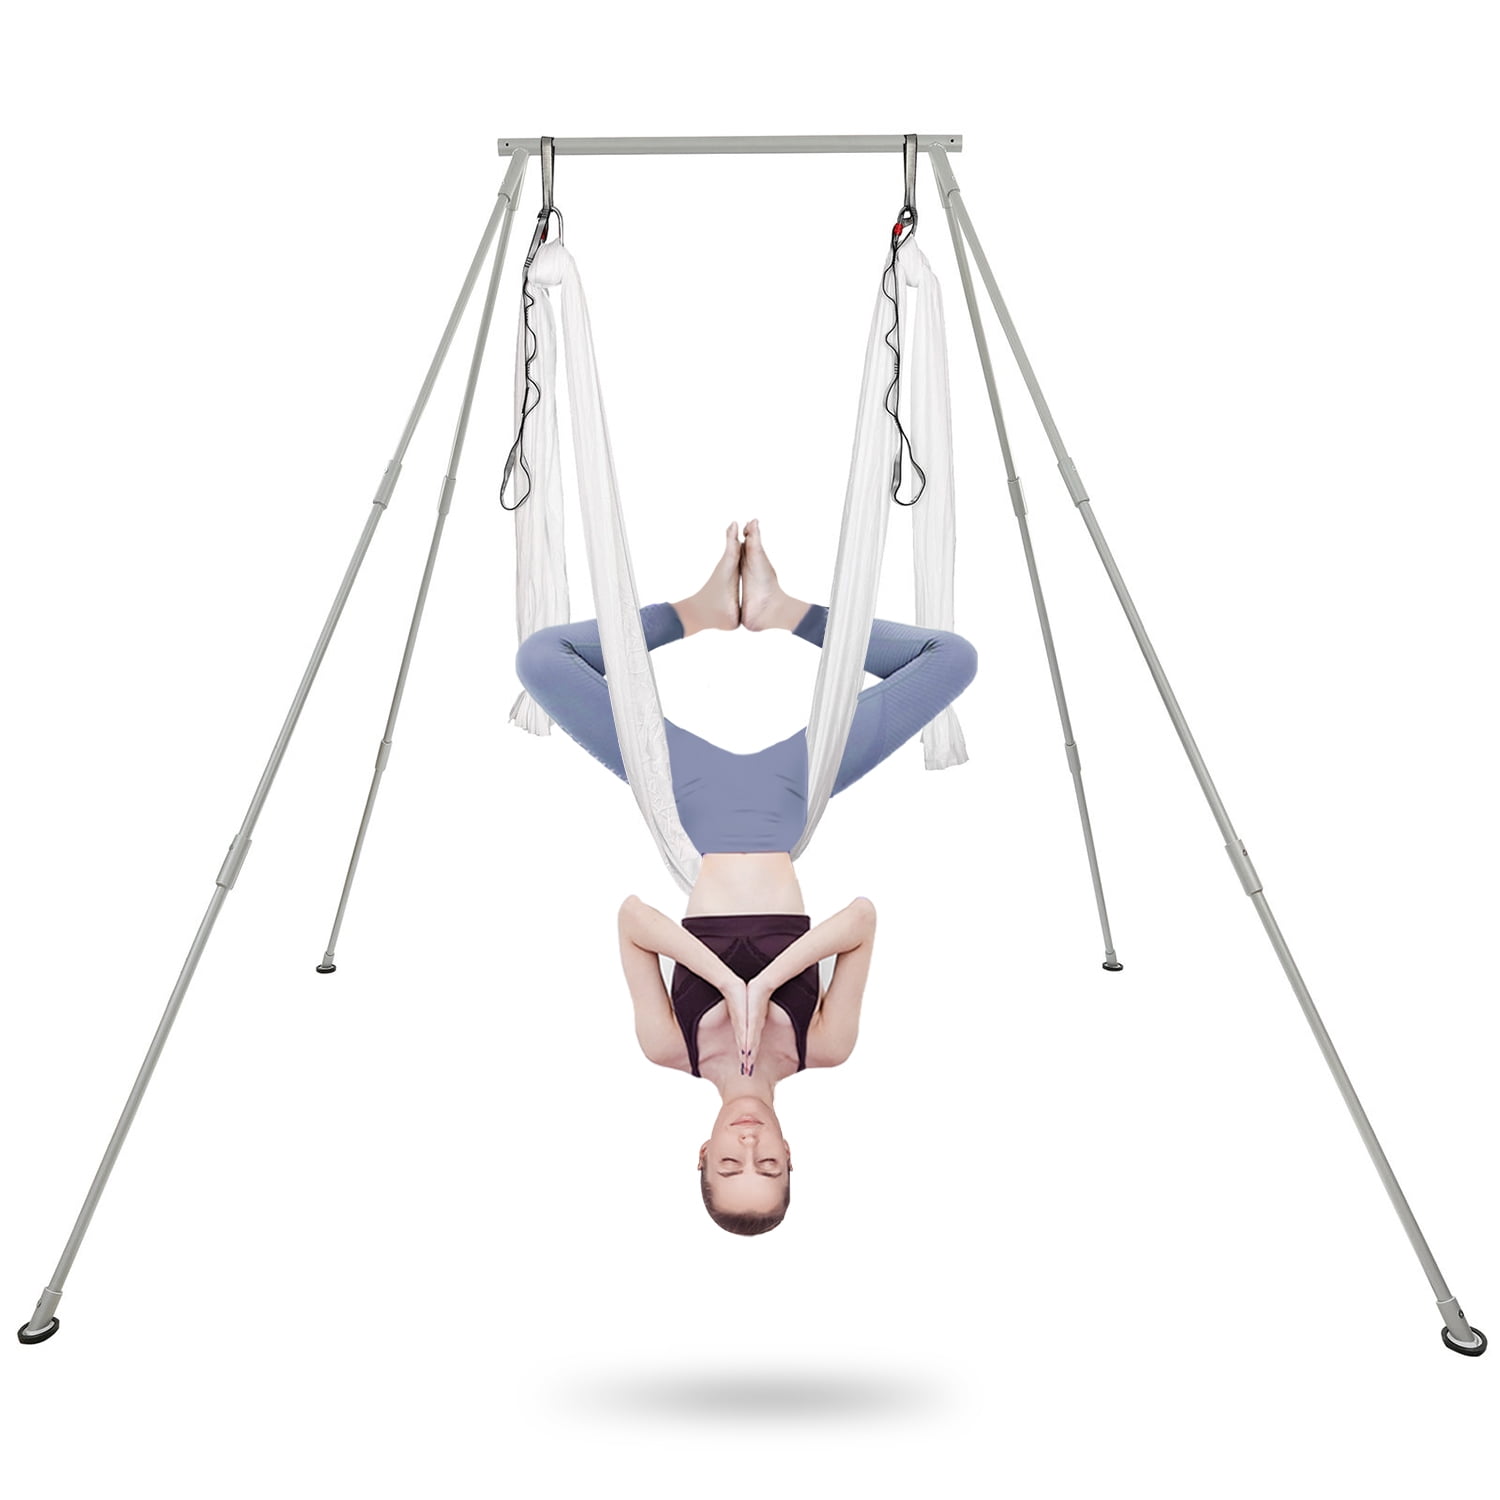 HECASA 551 lbs Aerial Yoga Frame W/ 20Ft/6m Yoga Swing Inversion Sling Body  Yoga Bundle Safety Belts for Indoor Outdoor Use 97 Inch 